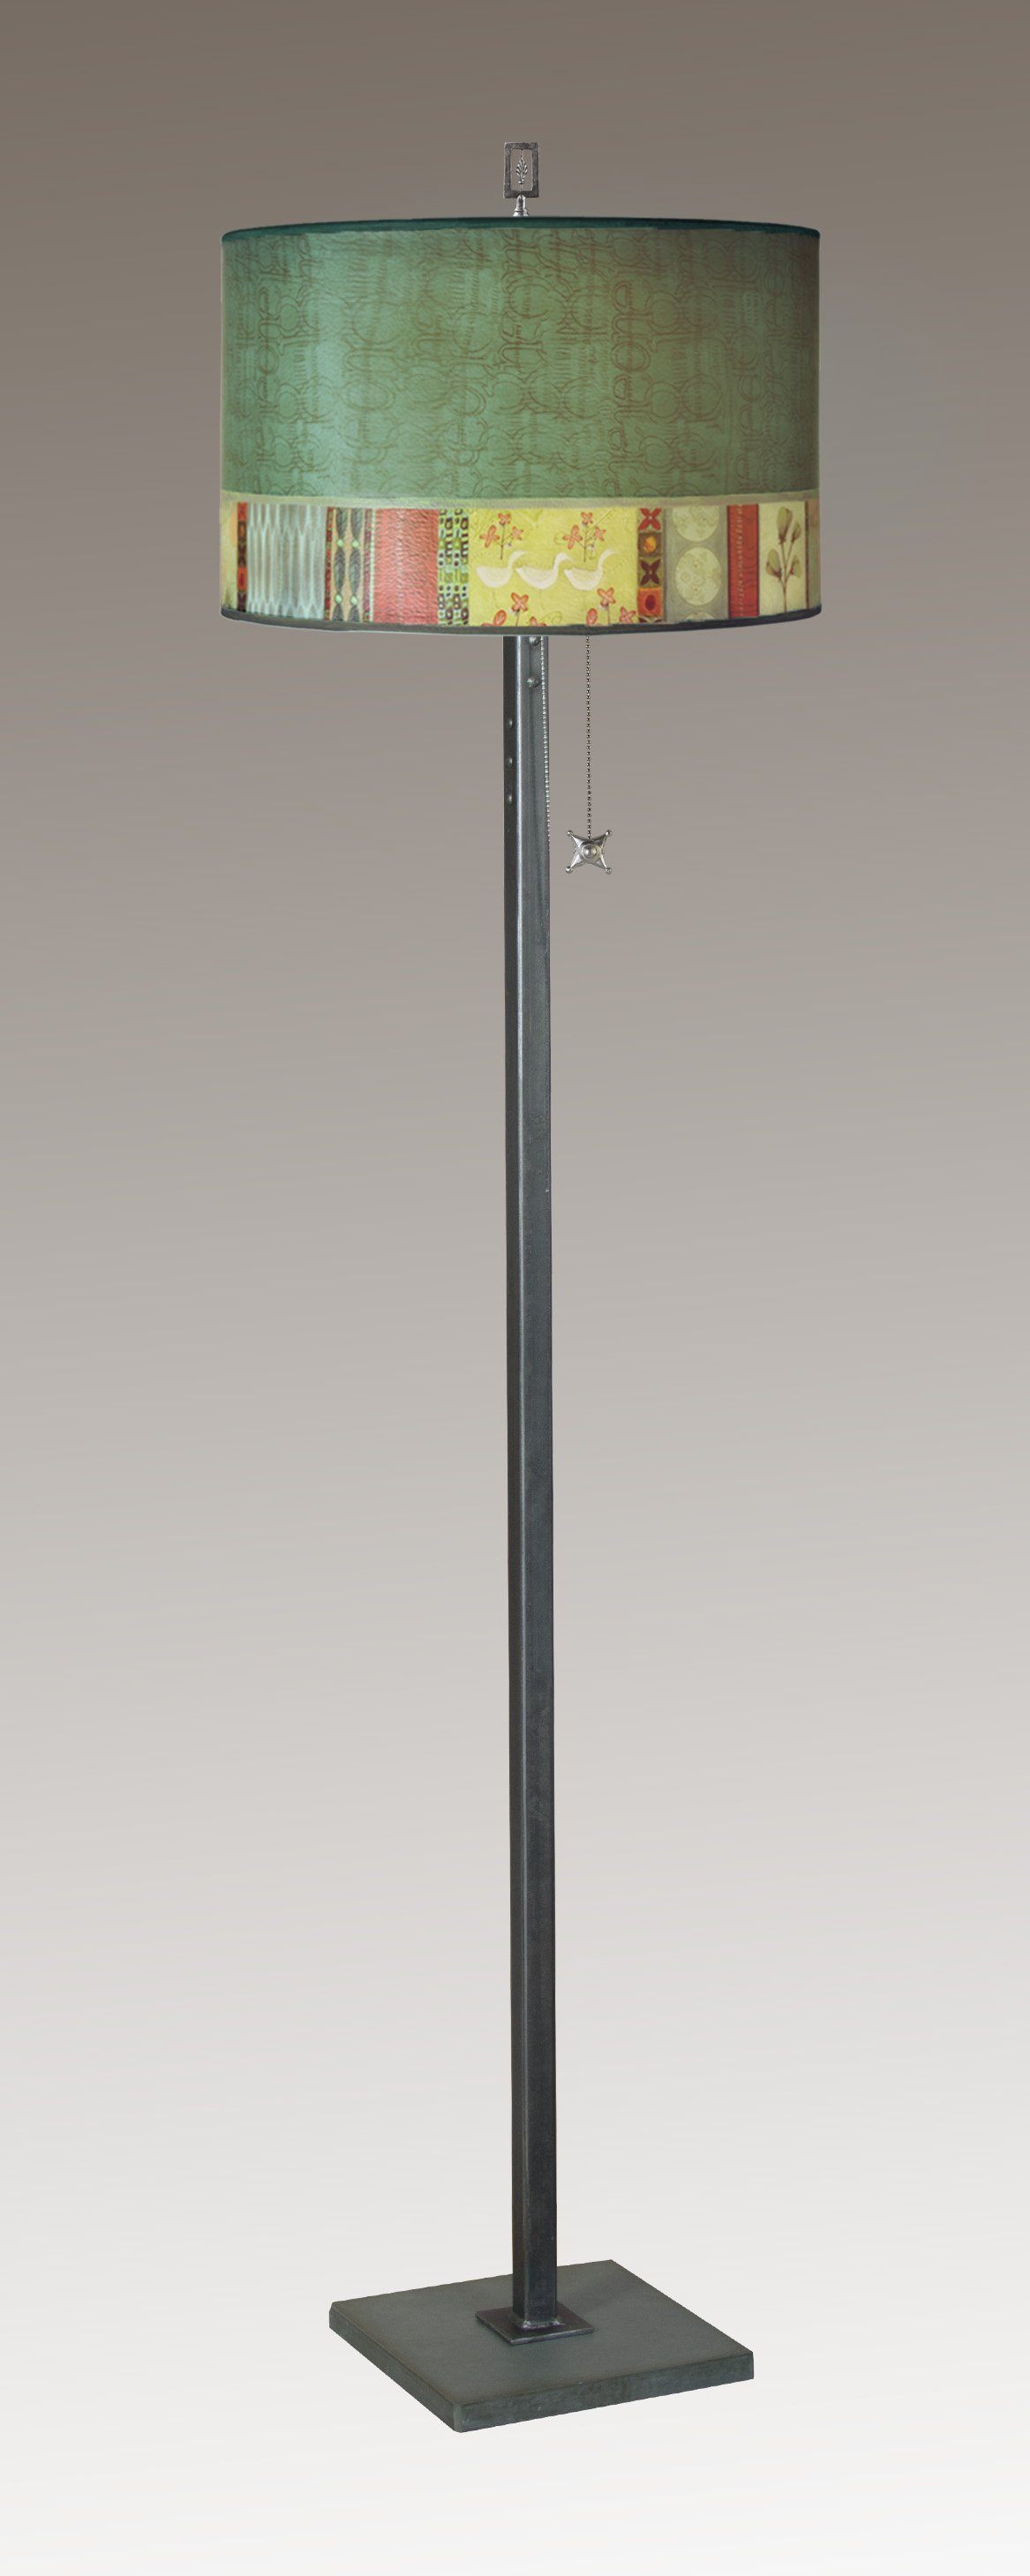 Steel Floor Lamp with Large Drum Shade in Melody in Jade